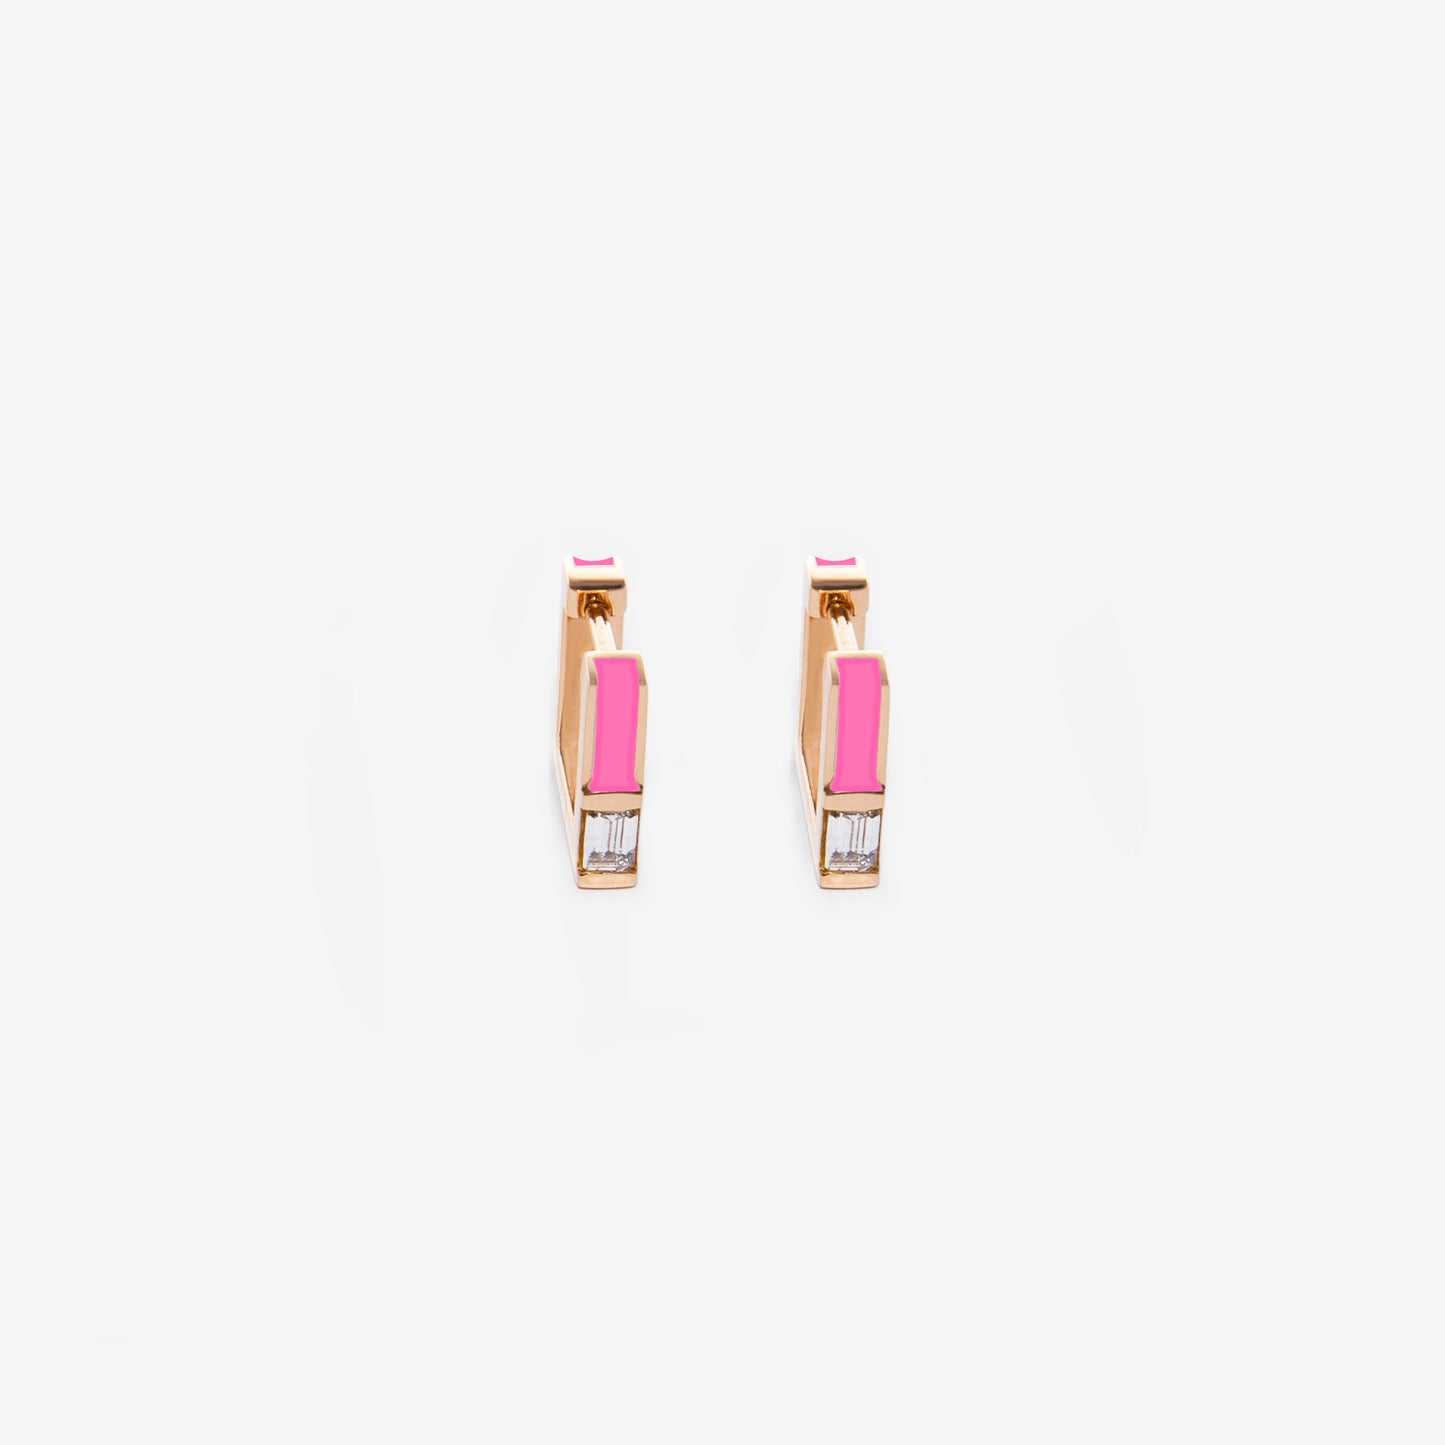 Square fluo pink earrings with diamonds